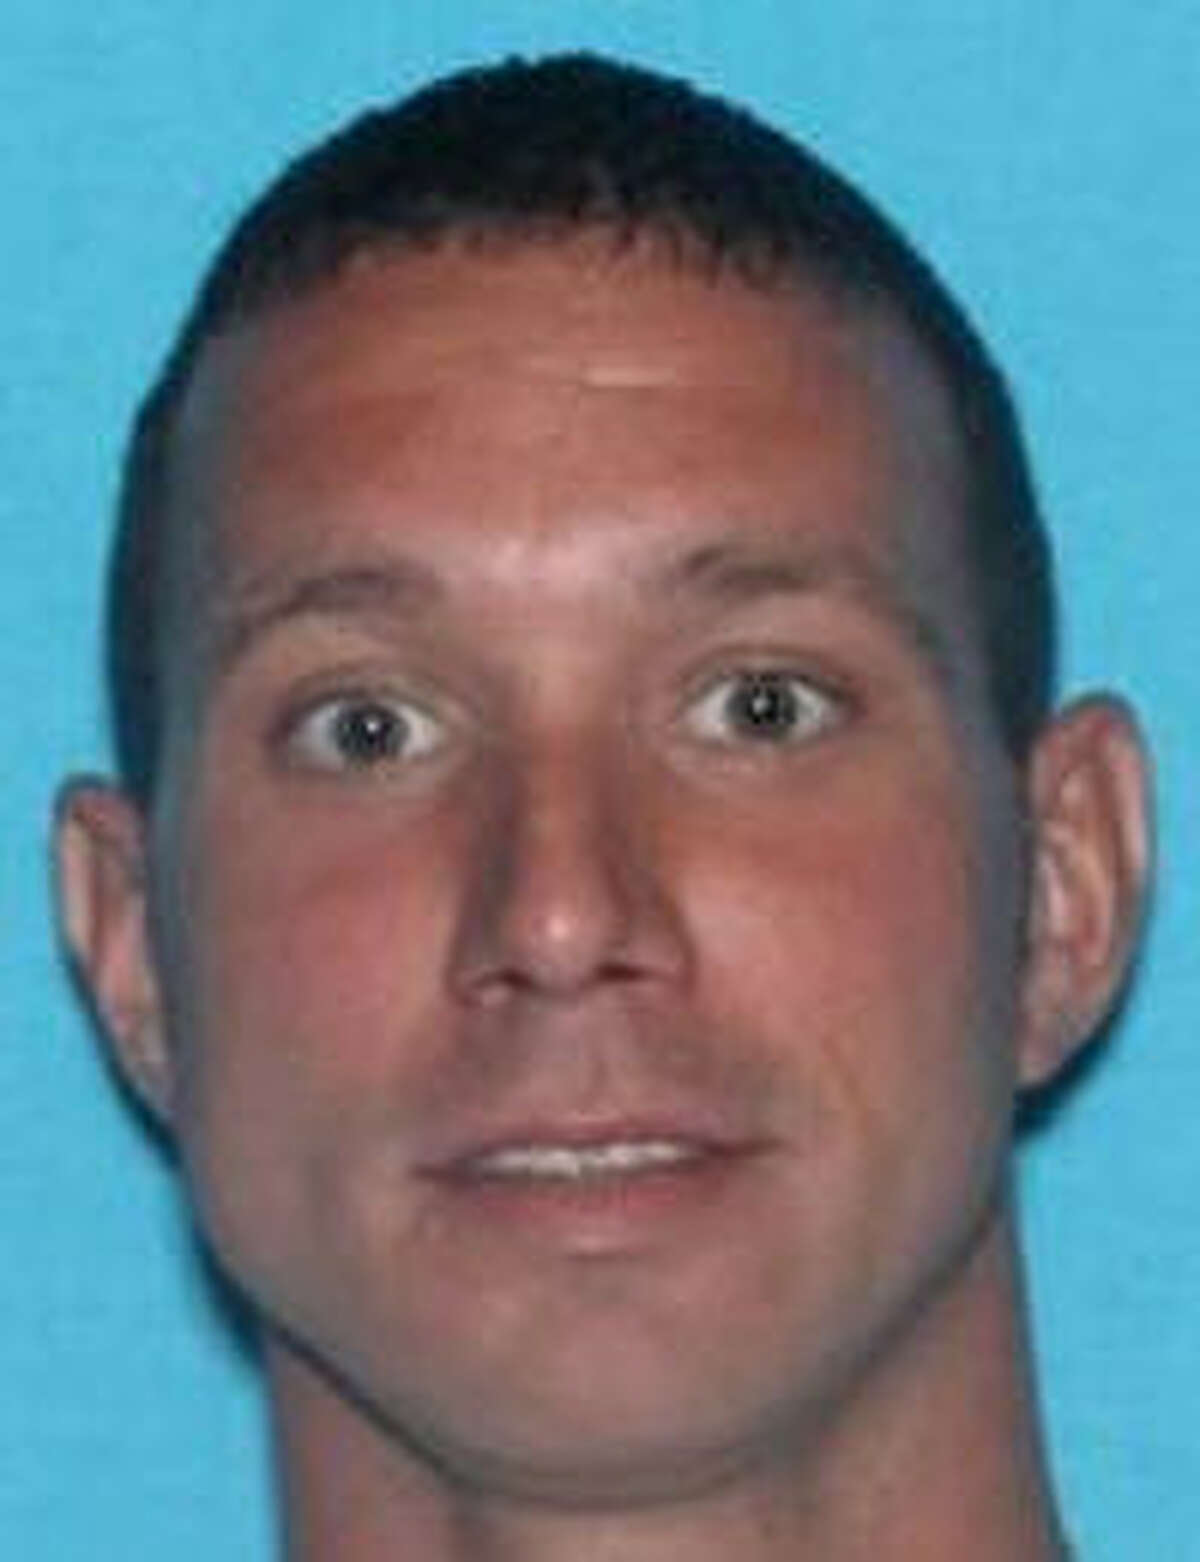 Texas' Most Wanted Jared Luke Langley, who has ties to the Aryan Brotherhood of Texas, was added to the Texas 10 Most Wanted Fugitives list Dec. 13, 2016. Click through the slides to see who else is wanted.